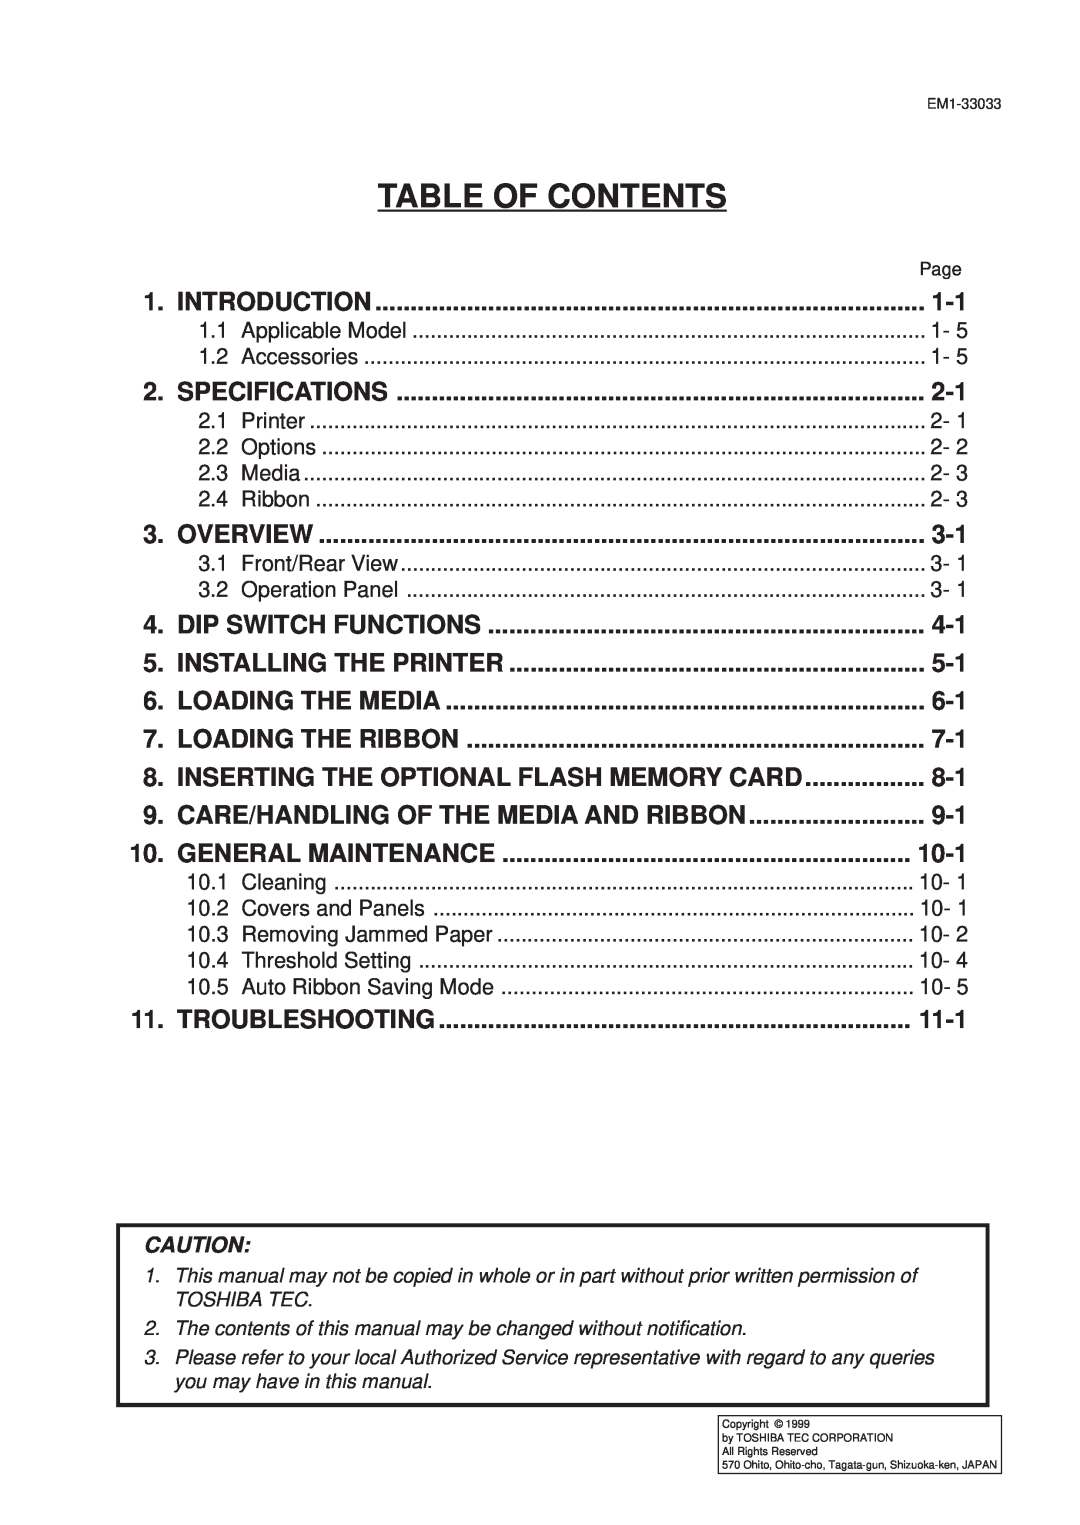 Toshiba EM1-33033E owner manual Table Of Contents 